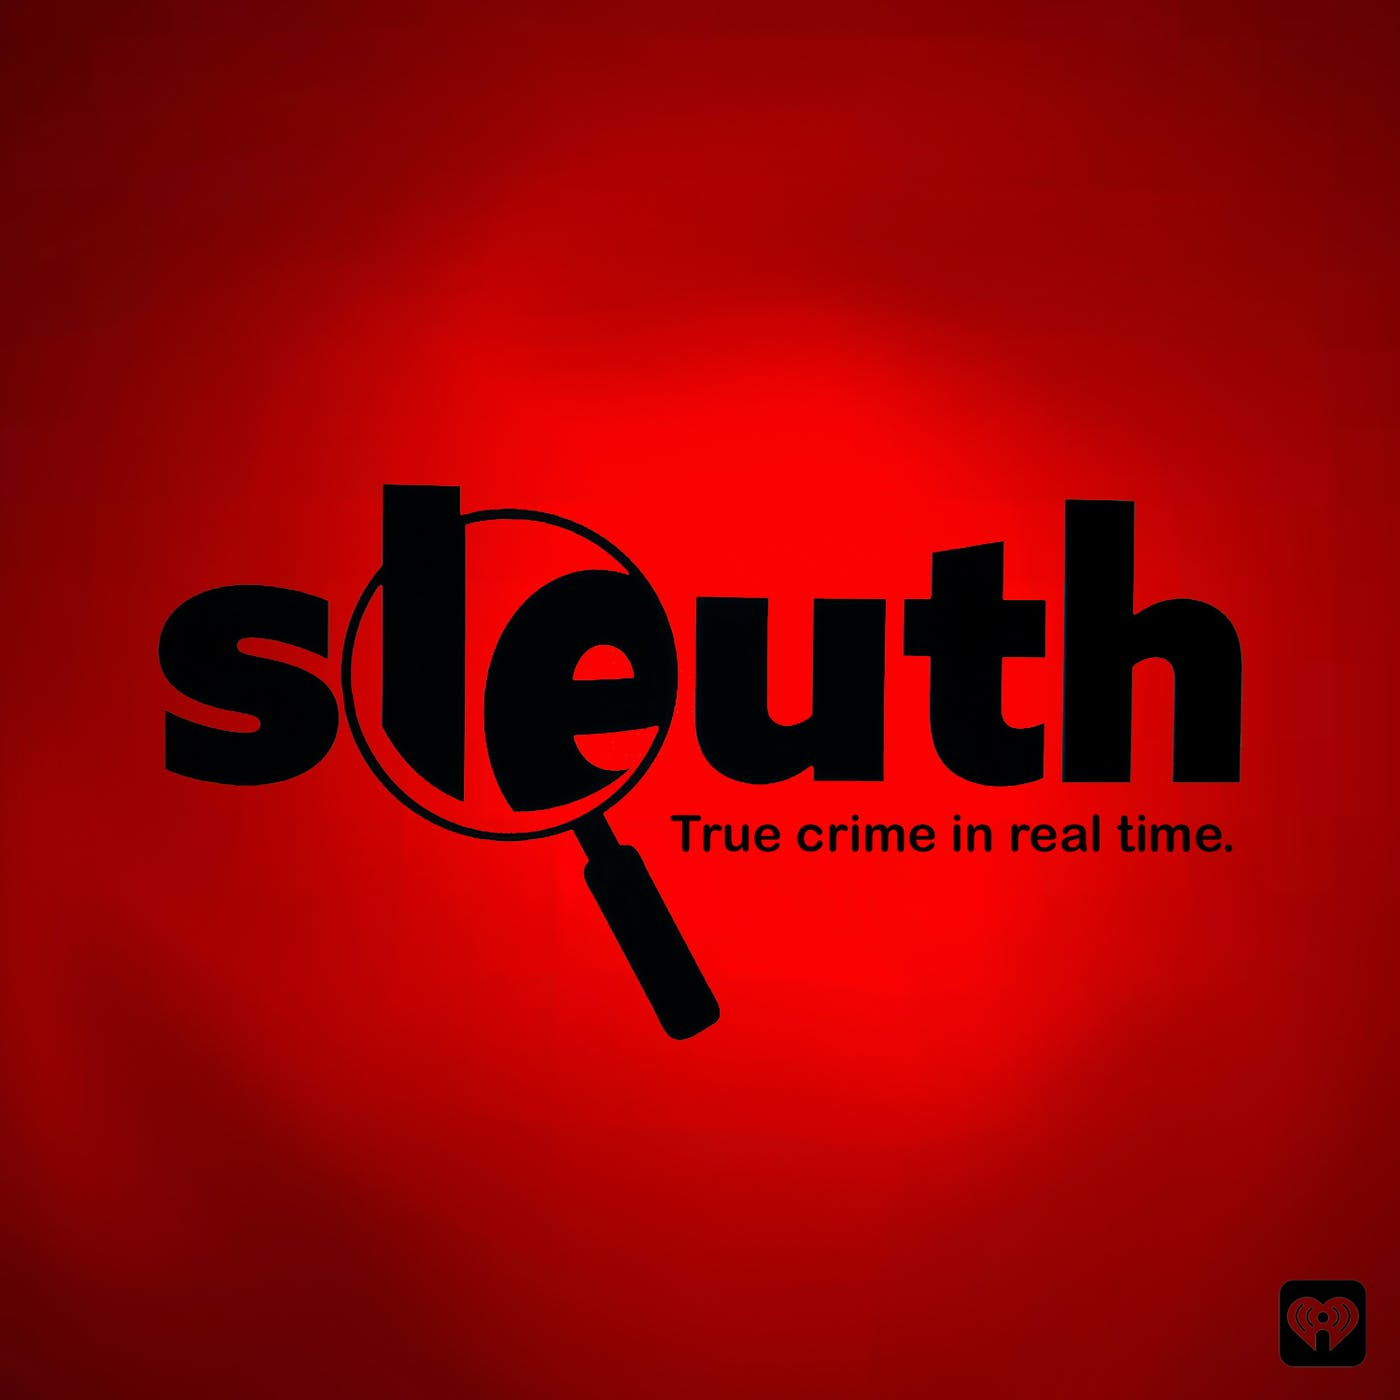 10.  Ashlee Mathis shares EXCLUSIVELY with SLEUTH what Wozniak Defense Counsel calls one of THE MOST COMPELLING STORIES POINTING TO RACHEL BUFFETT'S GUILT.